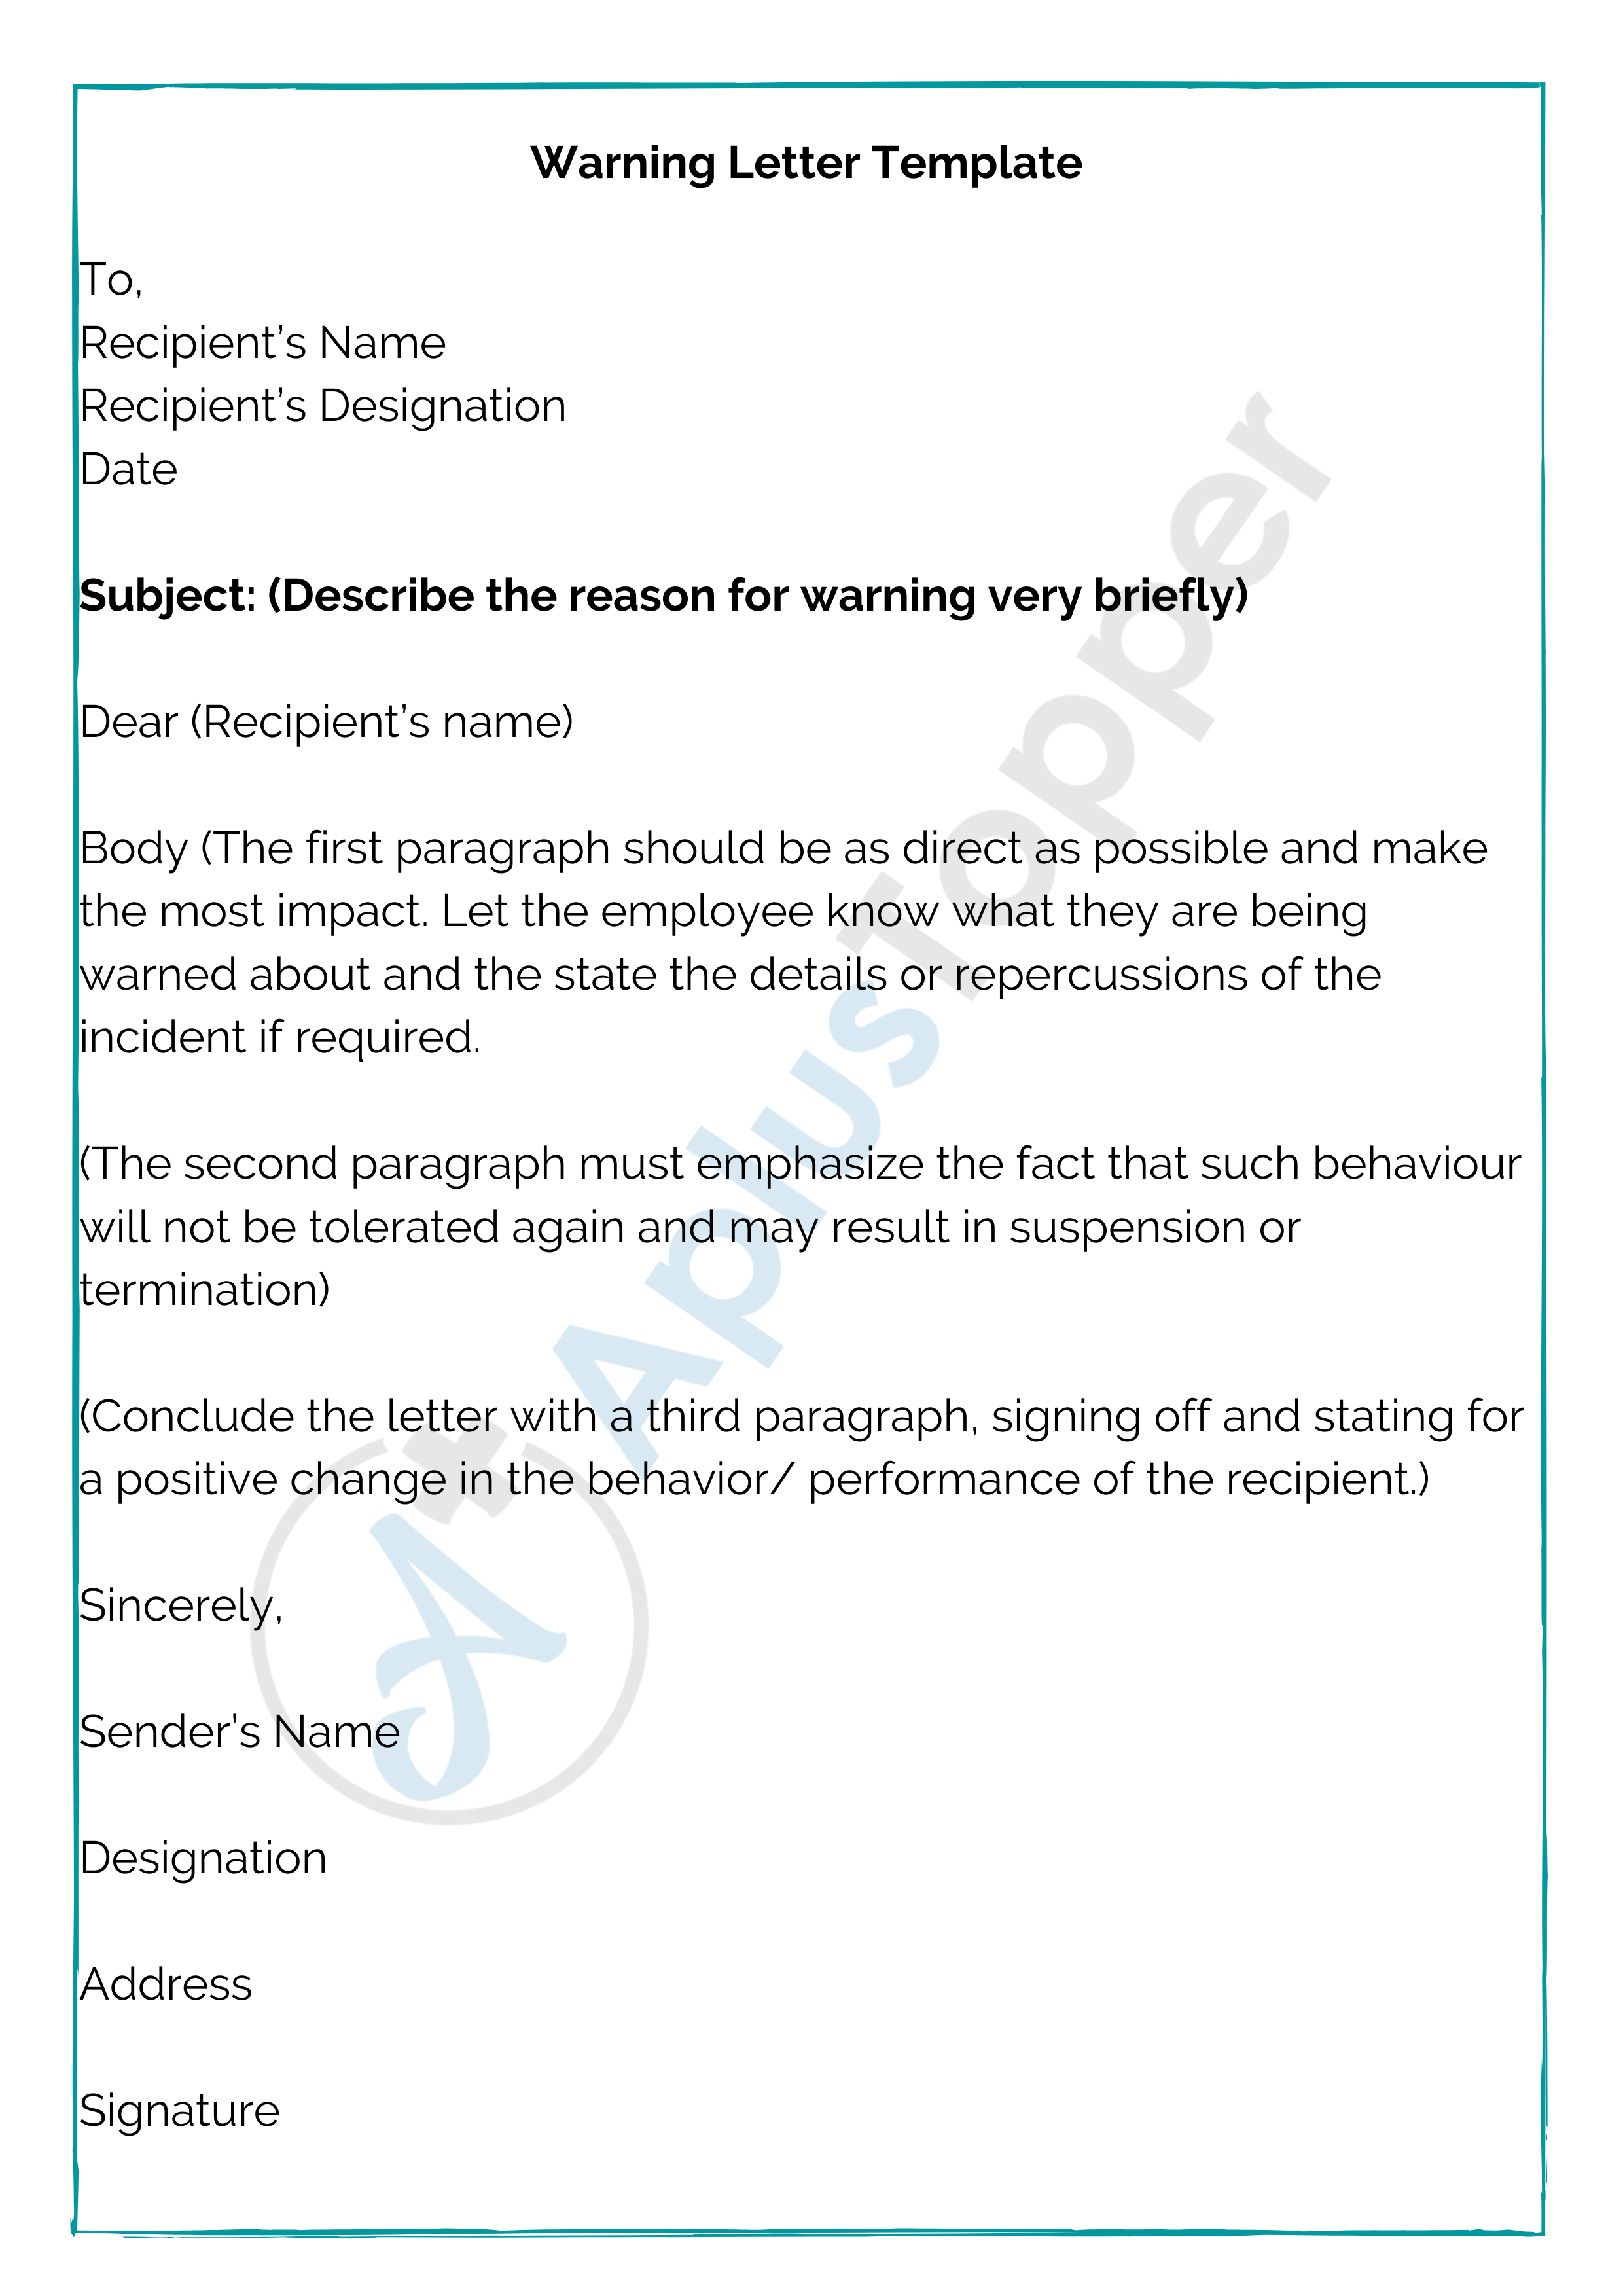 Warning Letter How To Write A Warning Letter Template Samples A